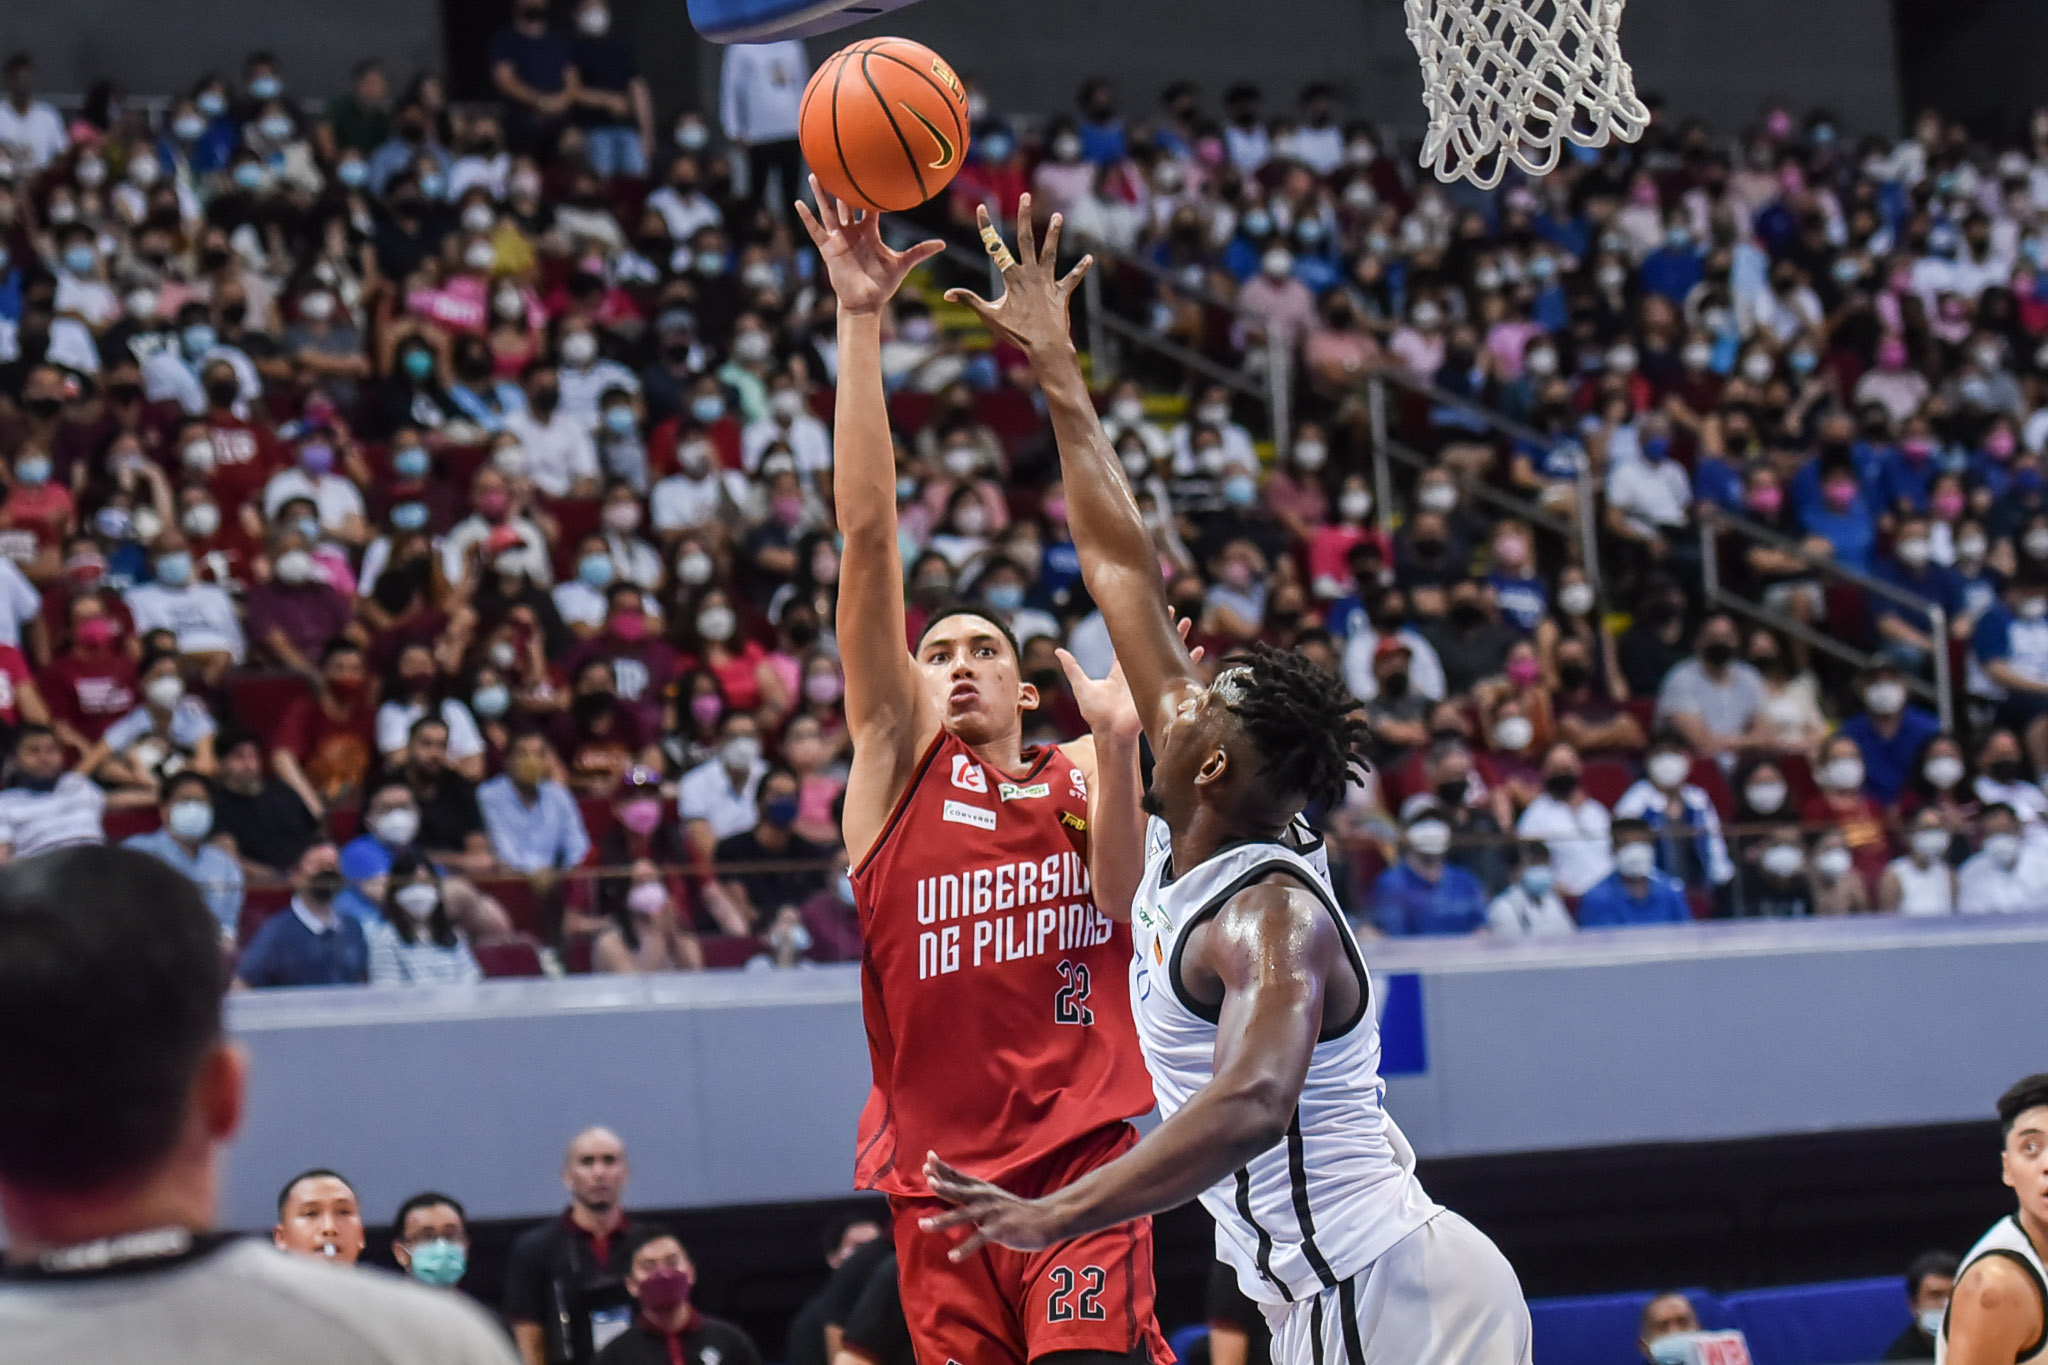 UAAP-84-MBB-ADMU-vs.-UP-Finals-G1-Zavier-Lucero-1973 UAAP 84: UP outlasts Ateneo in OT, moves on brink of ending 36-year drought ADMU Basketball News UAAP UP  - philippine sports news